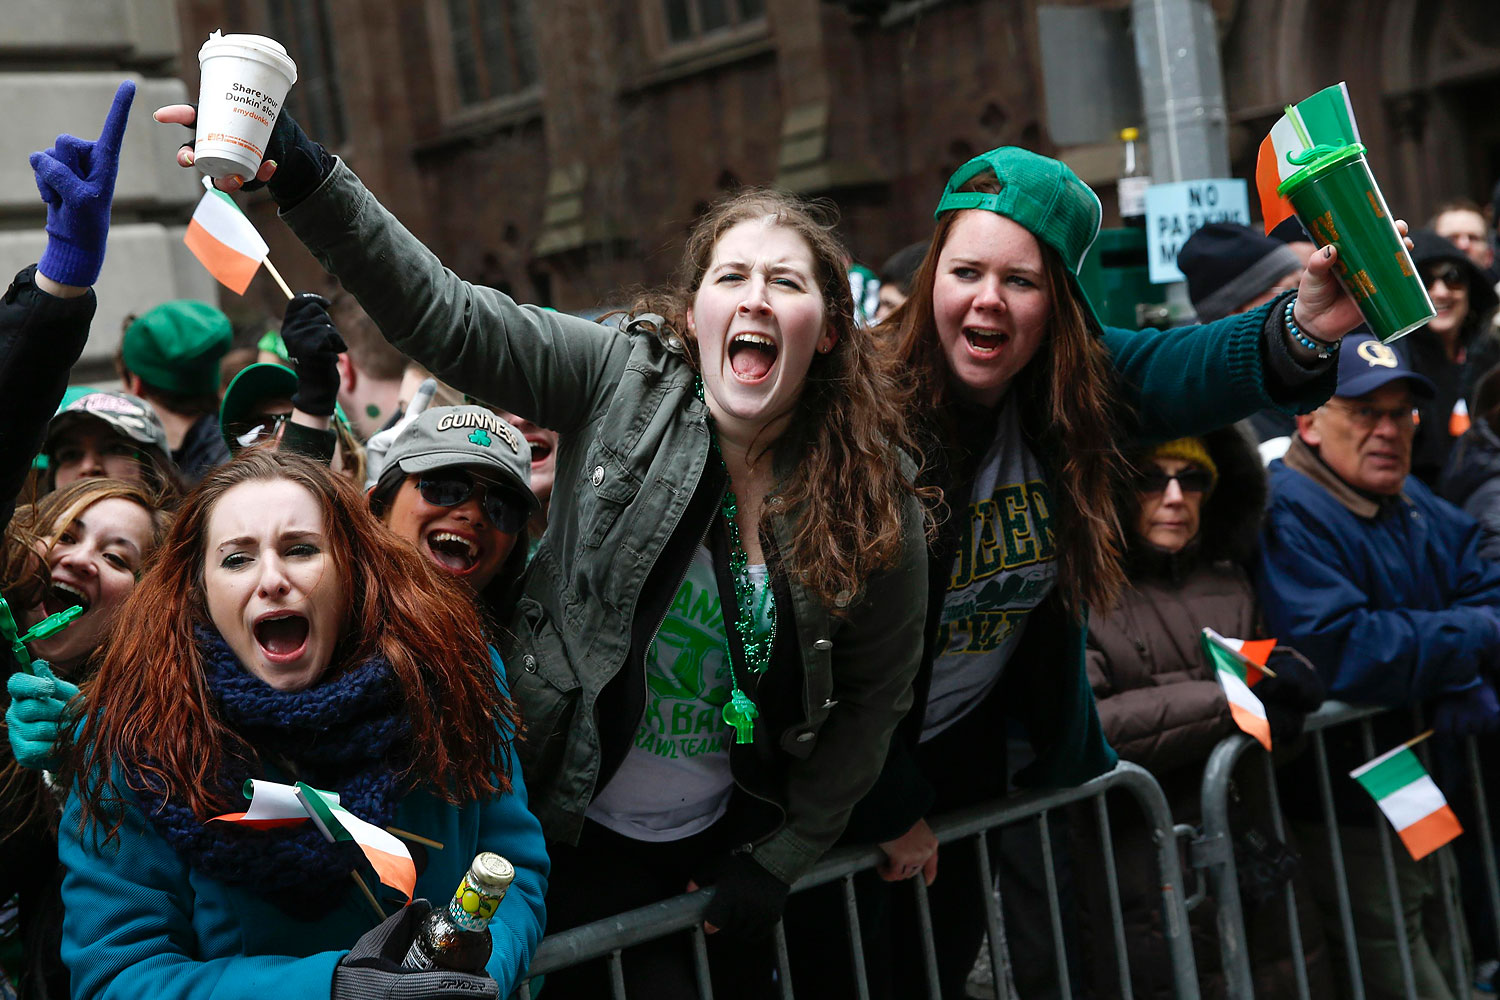 People cheer along 5th avenue during the St. Patrick's Day parade in New York, March 17, 2014.